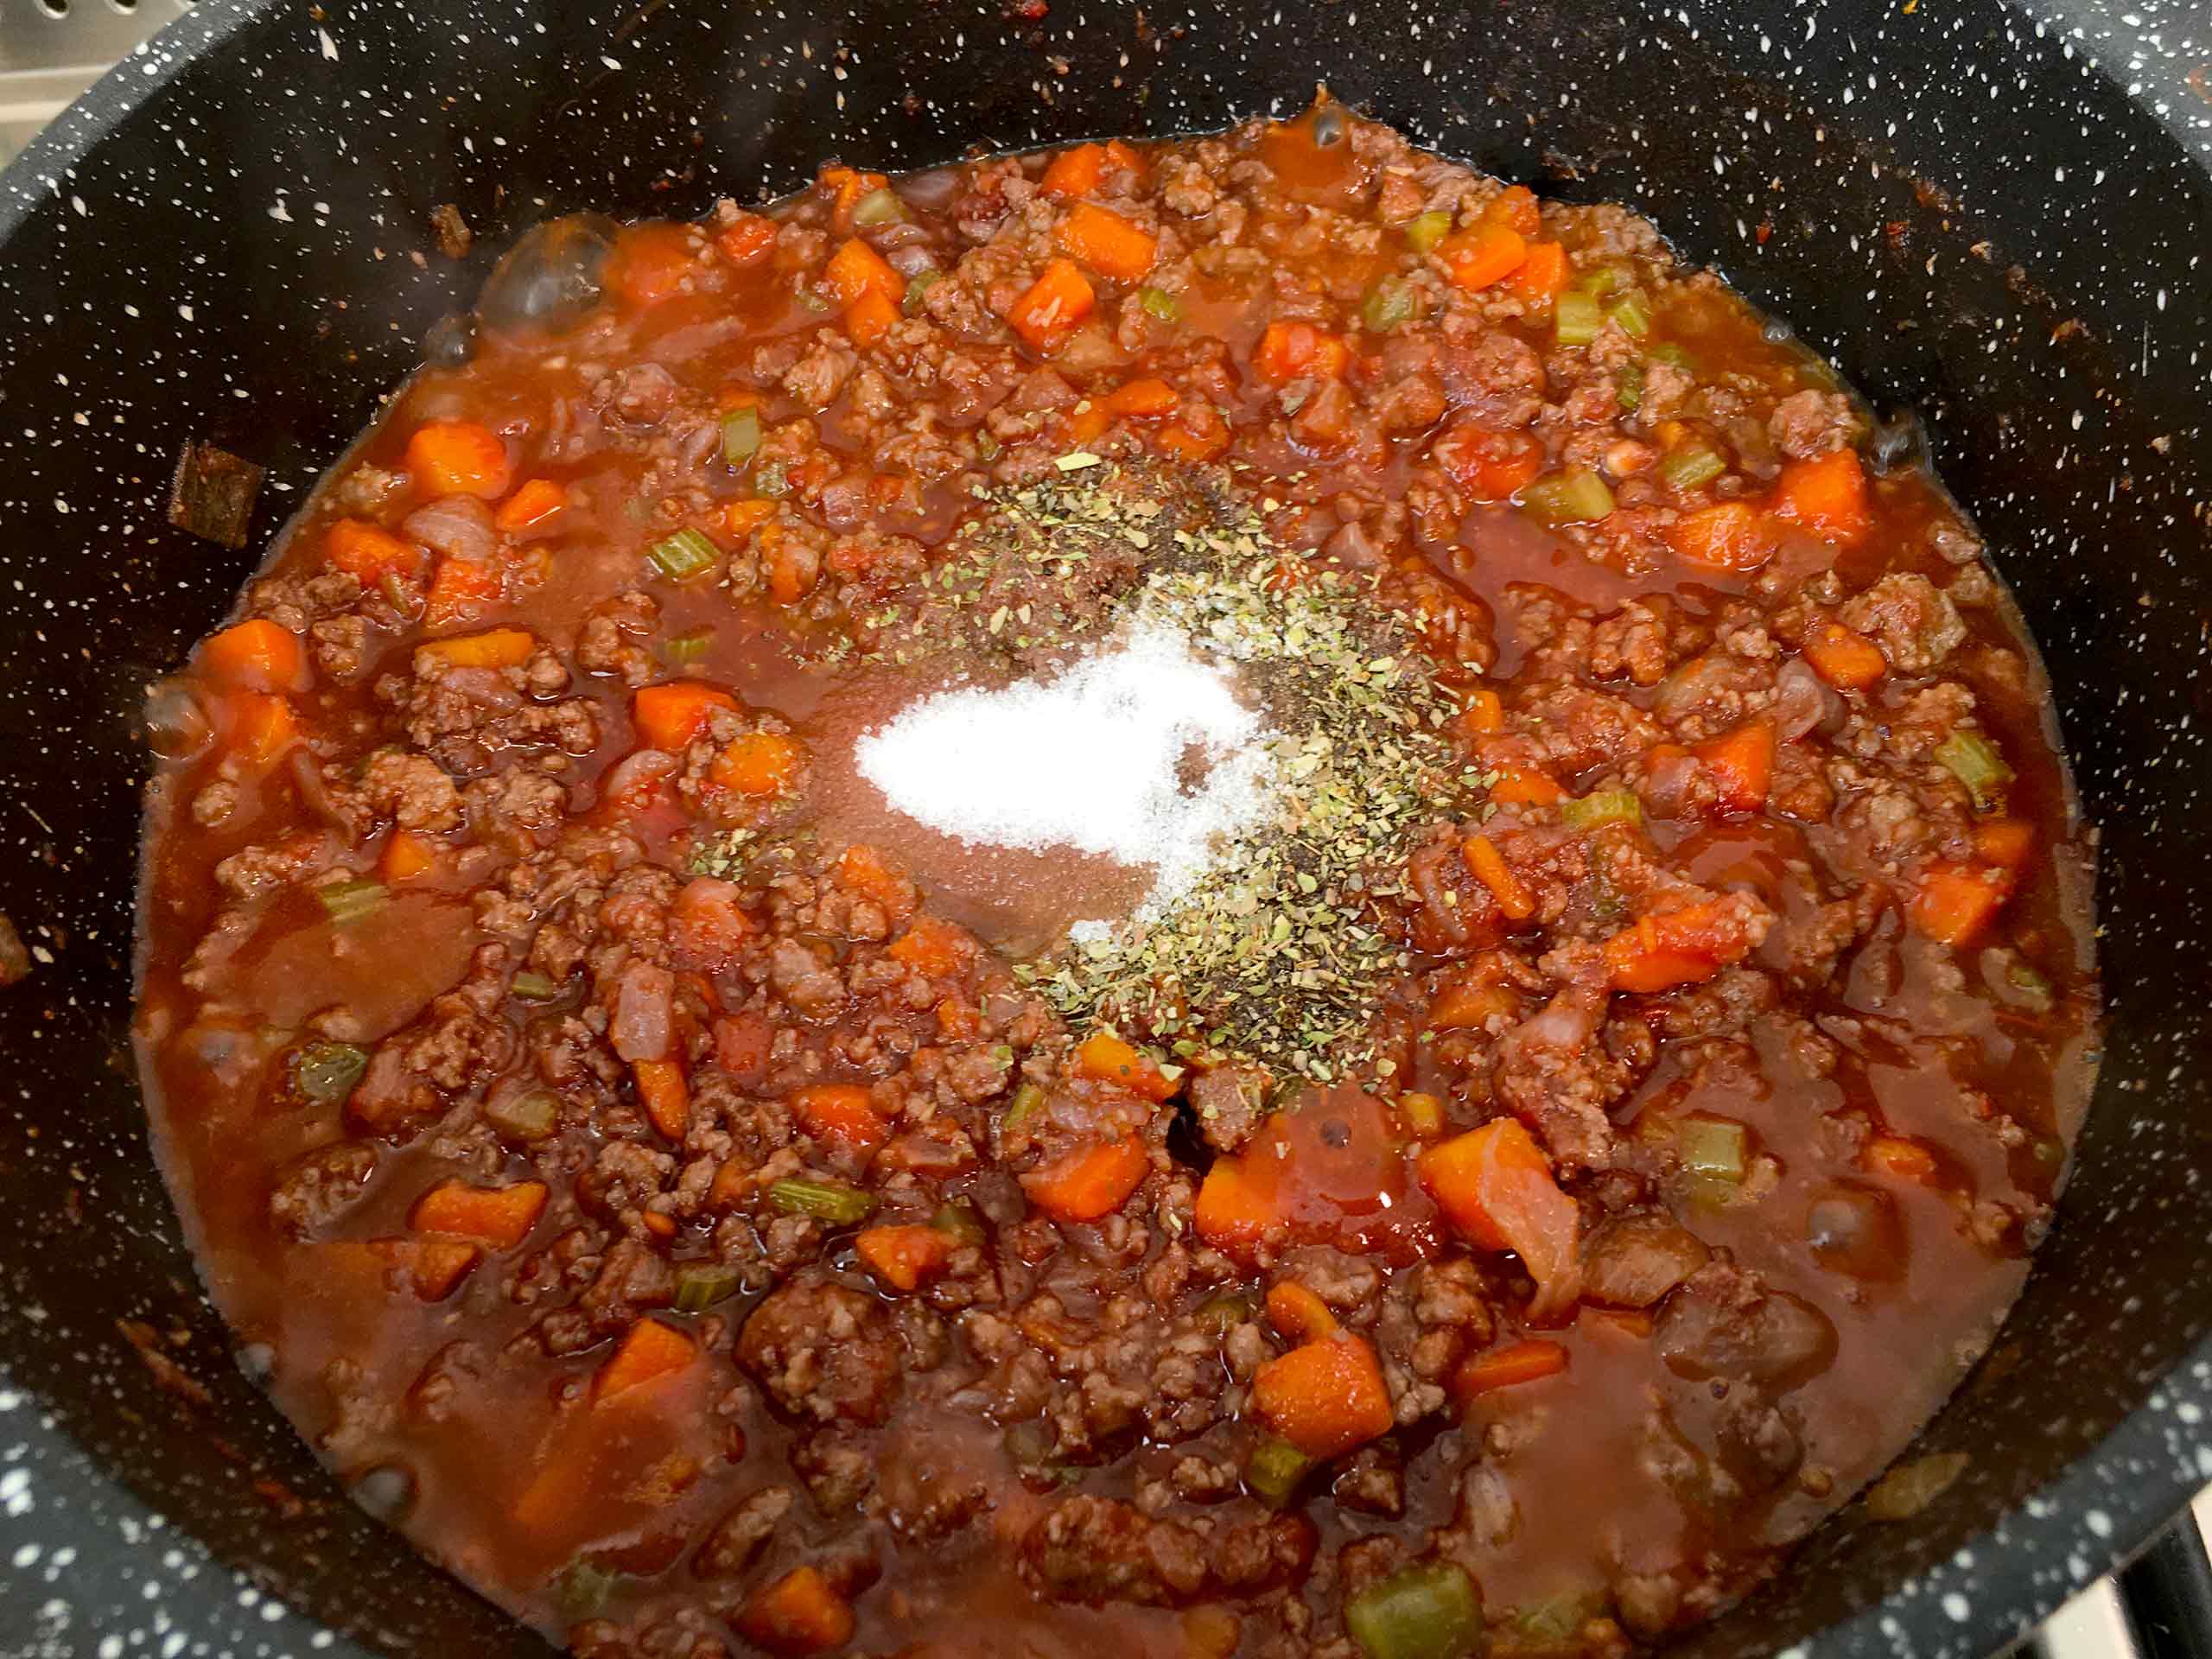 add thesalt, pepper, sugar and oregano to the bolognese sauce